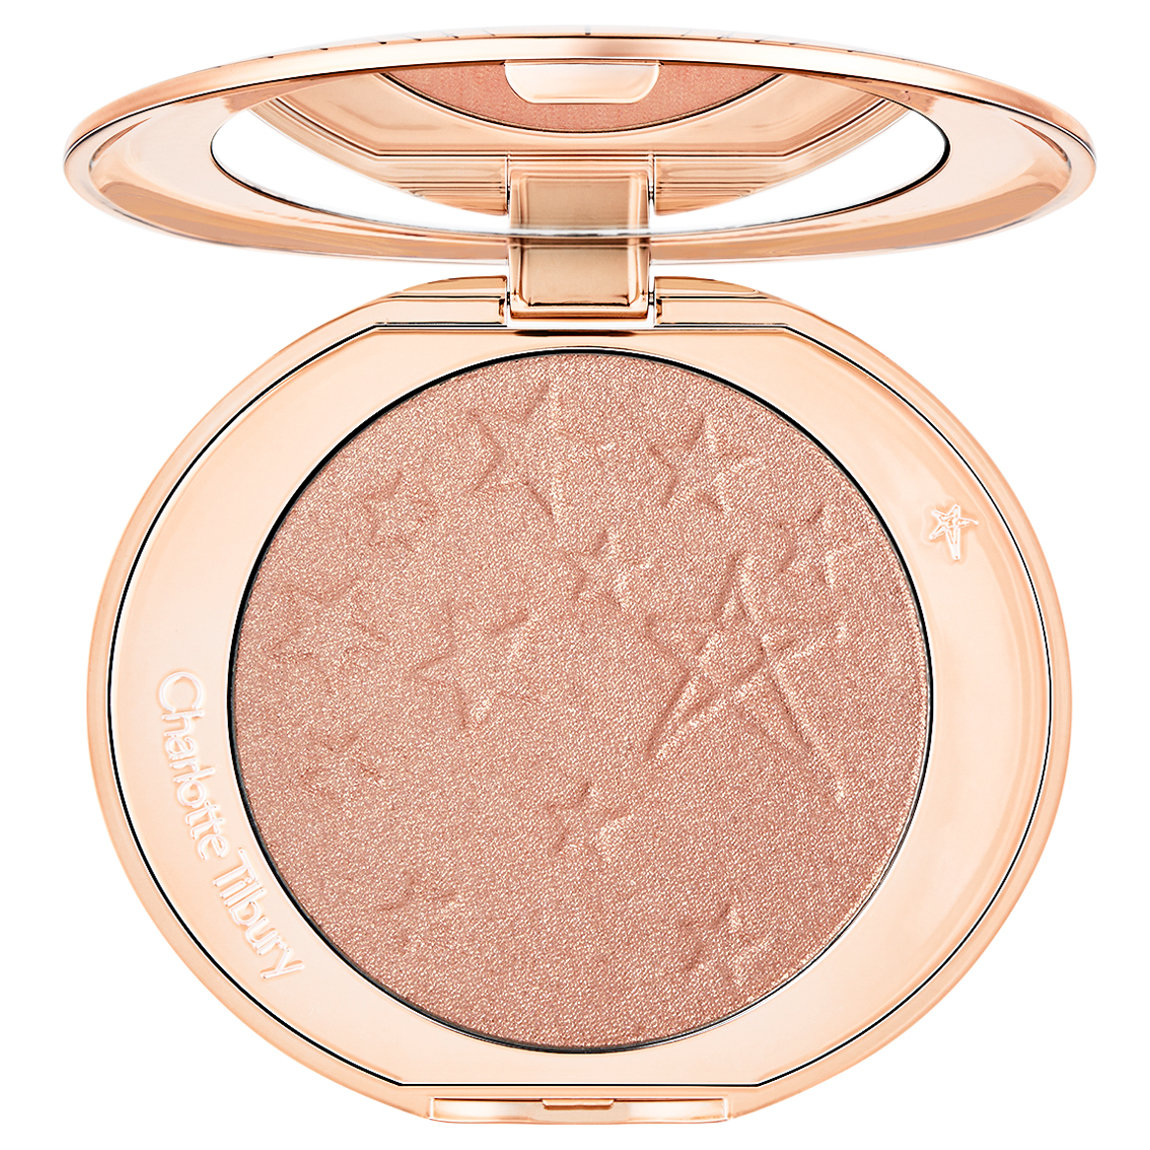 Charlotte Tilbury Glow Glide Face Architect Highlighter in Pillow Talk Glow